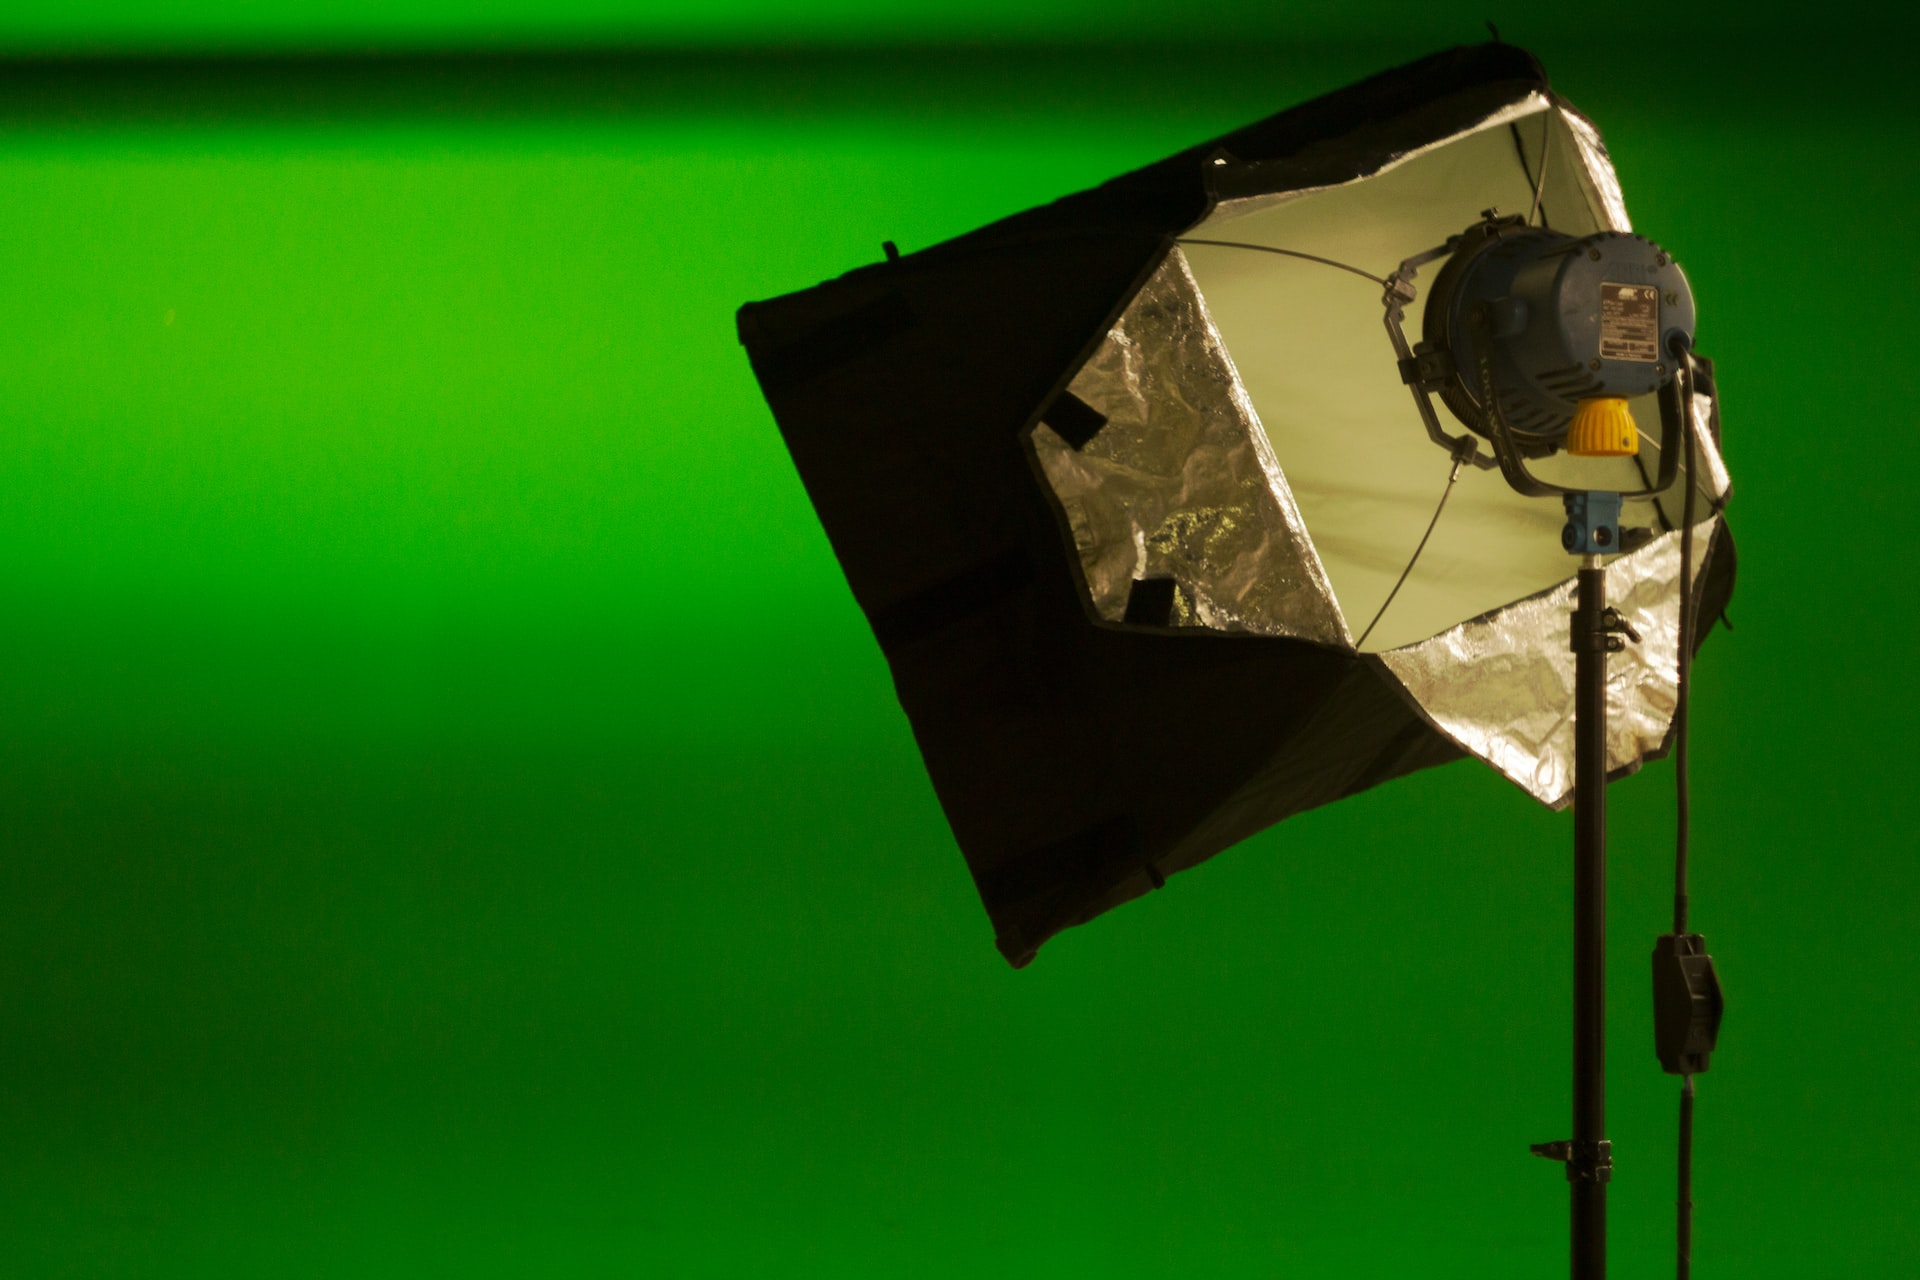 How to Use a Green Screen? The Guide